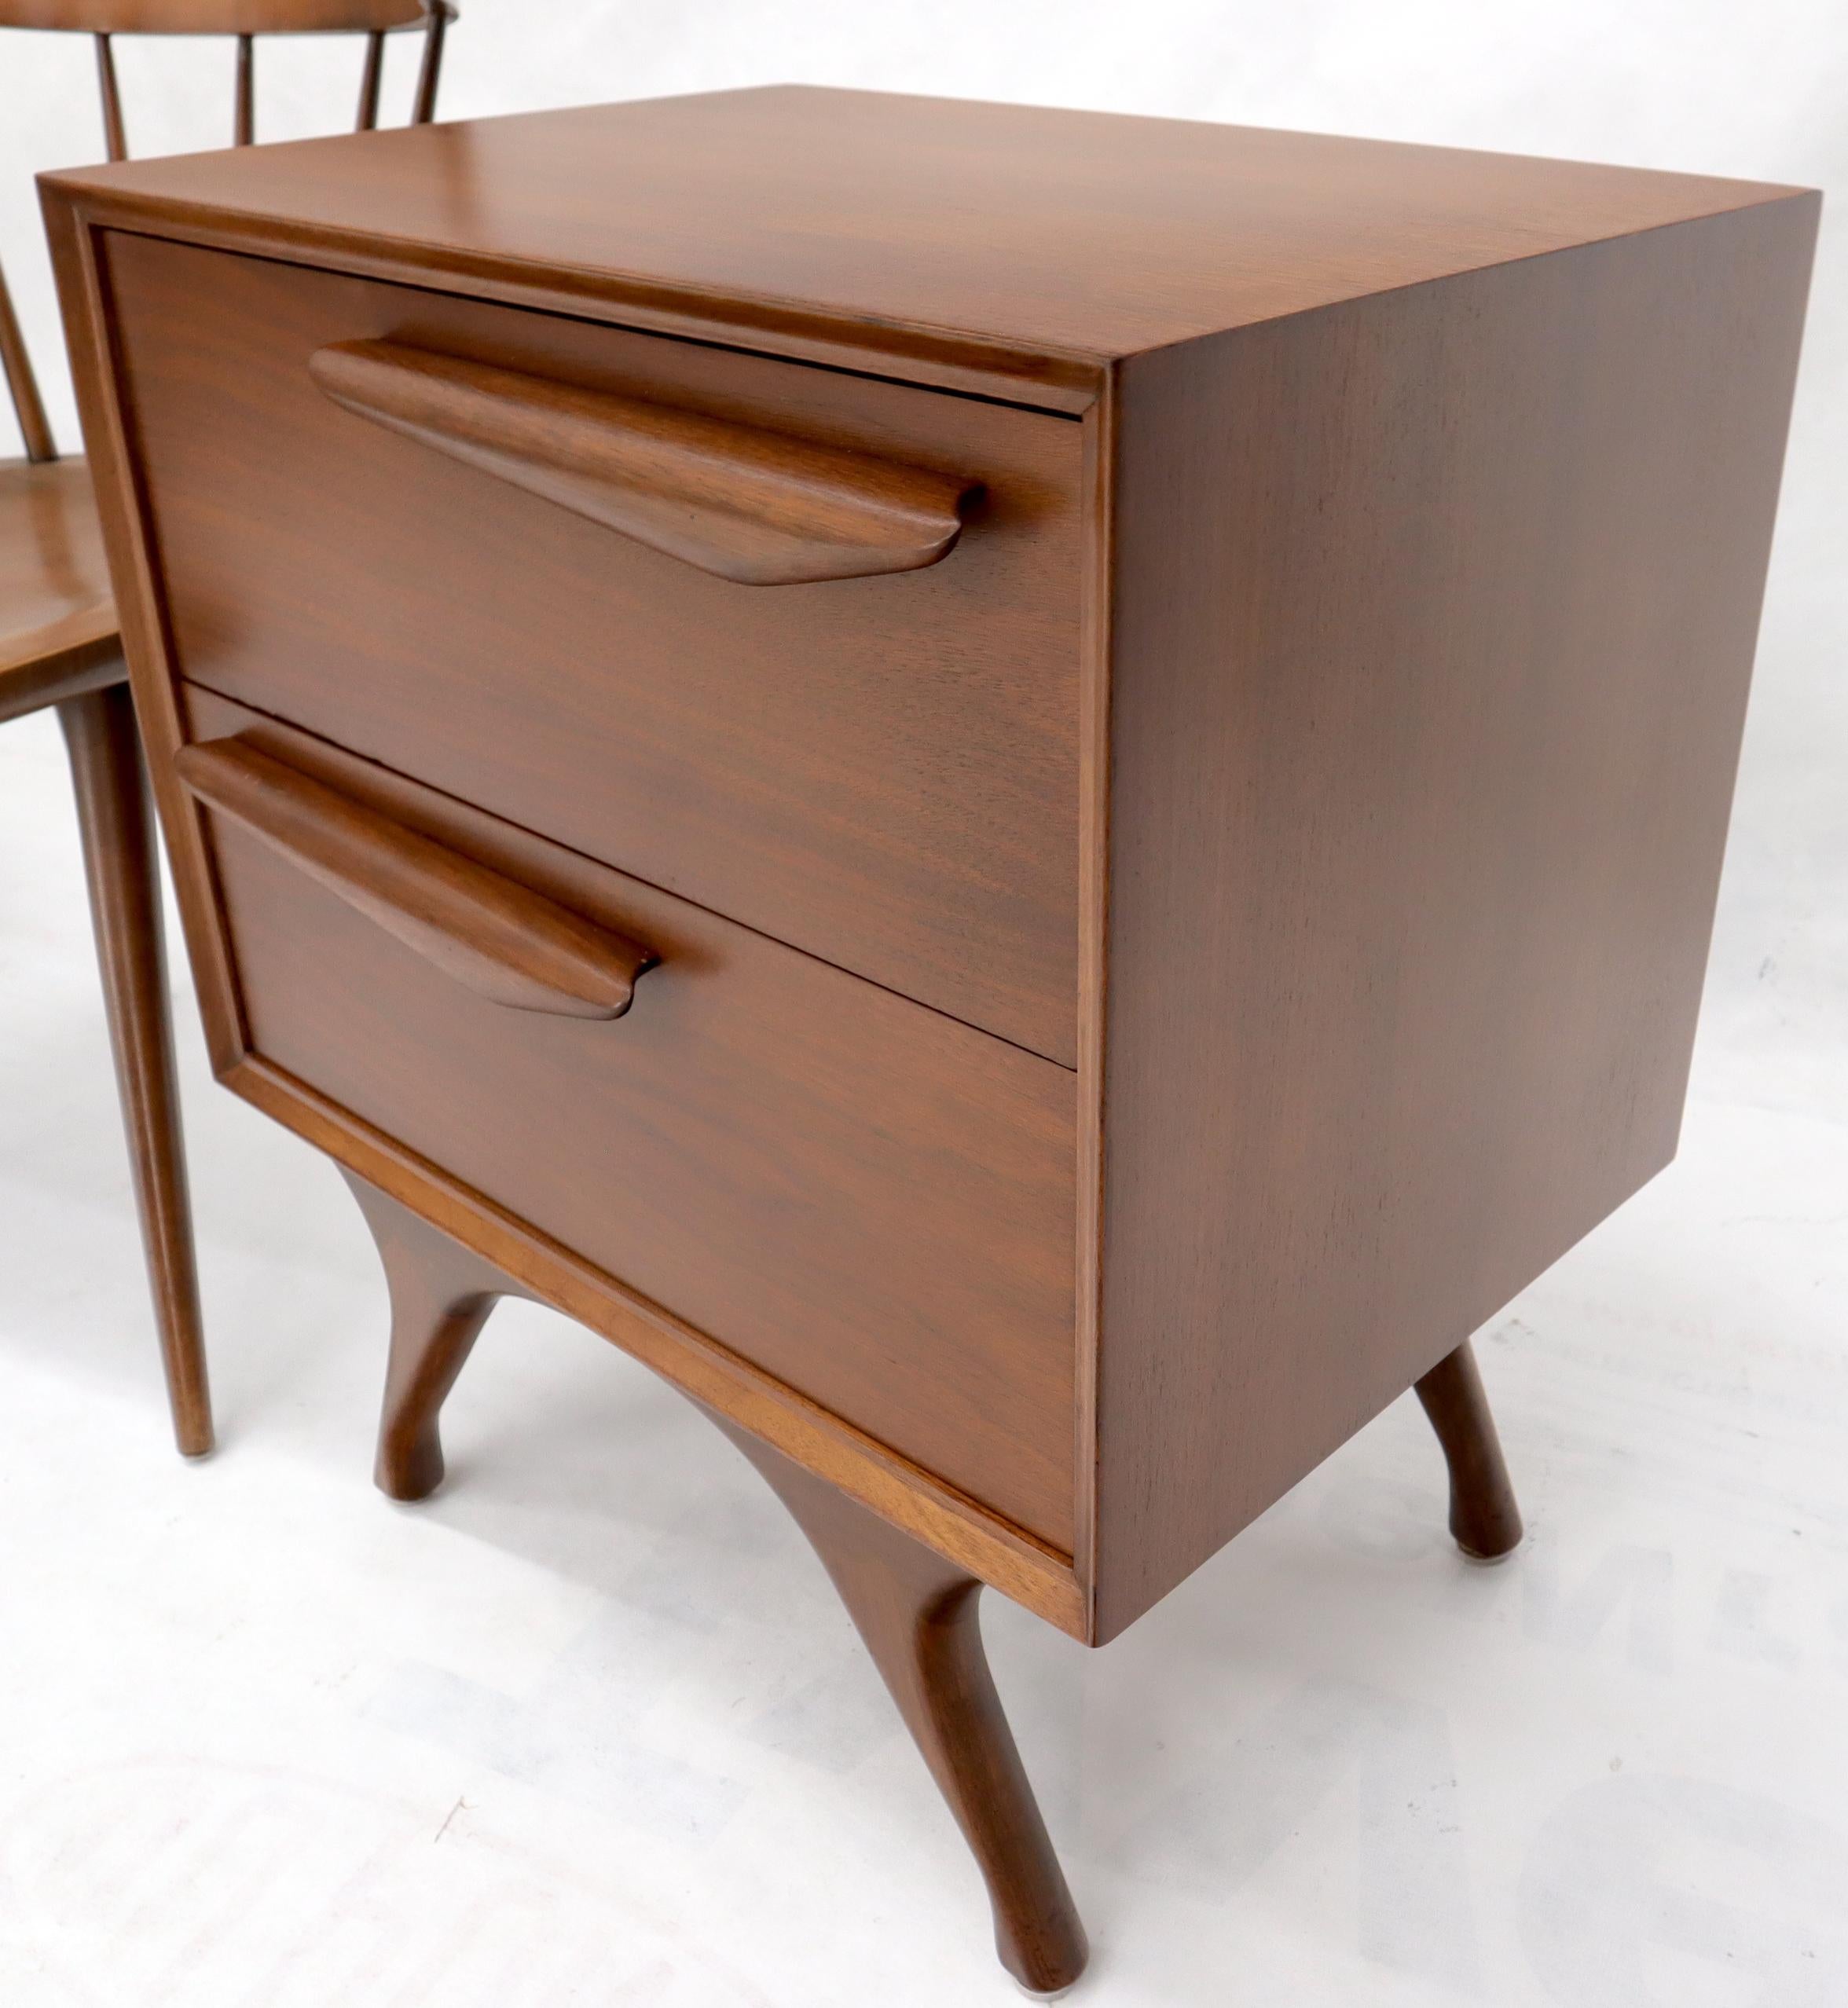 Pair of American Modern Walnut Sculptured Legs Pulls Two Drawers Nightstands For Sale 1